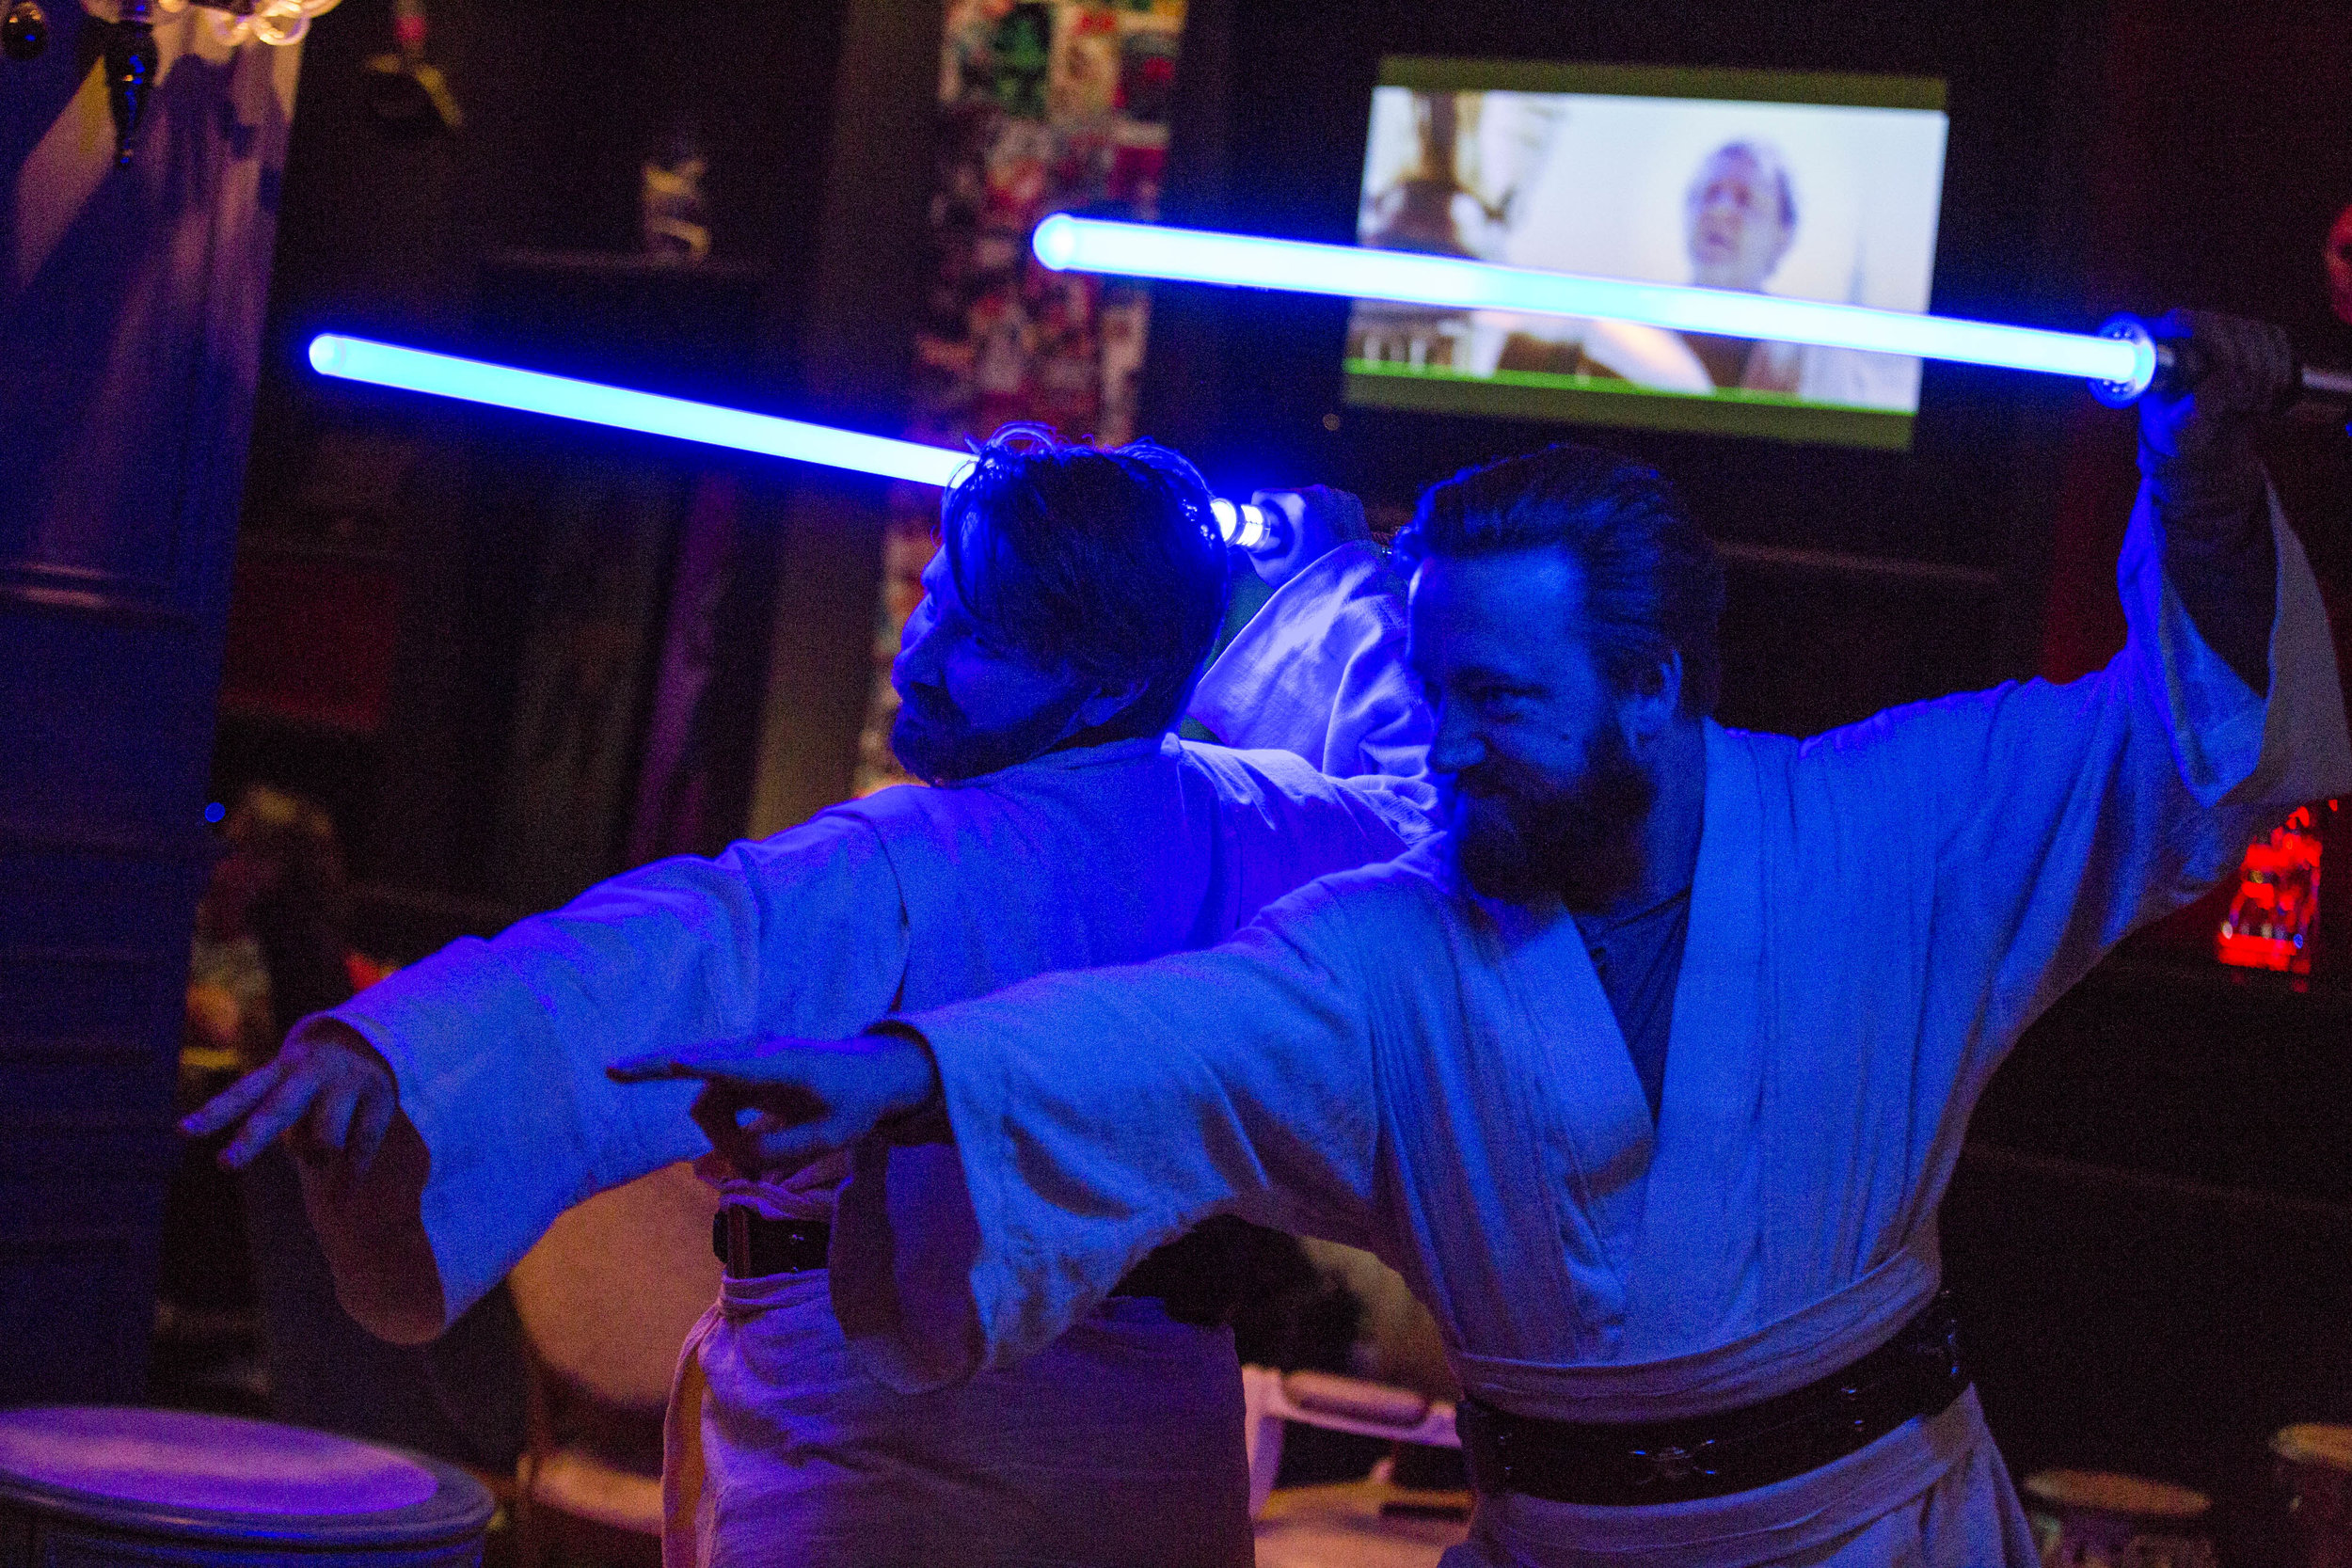  Rebecca Zobell, left, and Jack Stuart, both dressed as Obi Wan Kenobi, pose for their friends as they celebrate the 40th anniversary of the release of Episode IV – A New Hope at the Millennium Fandom Bar in the Arts District on Thursday, May 25, 201